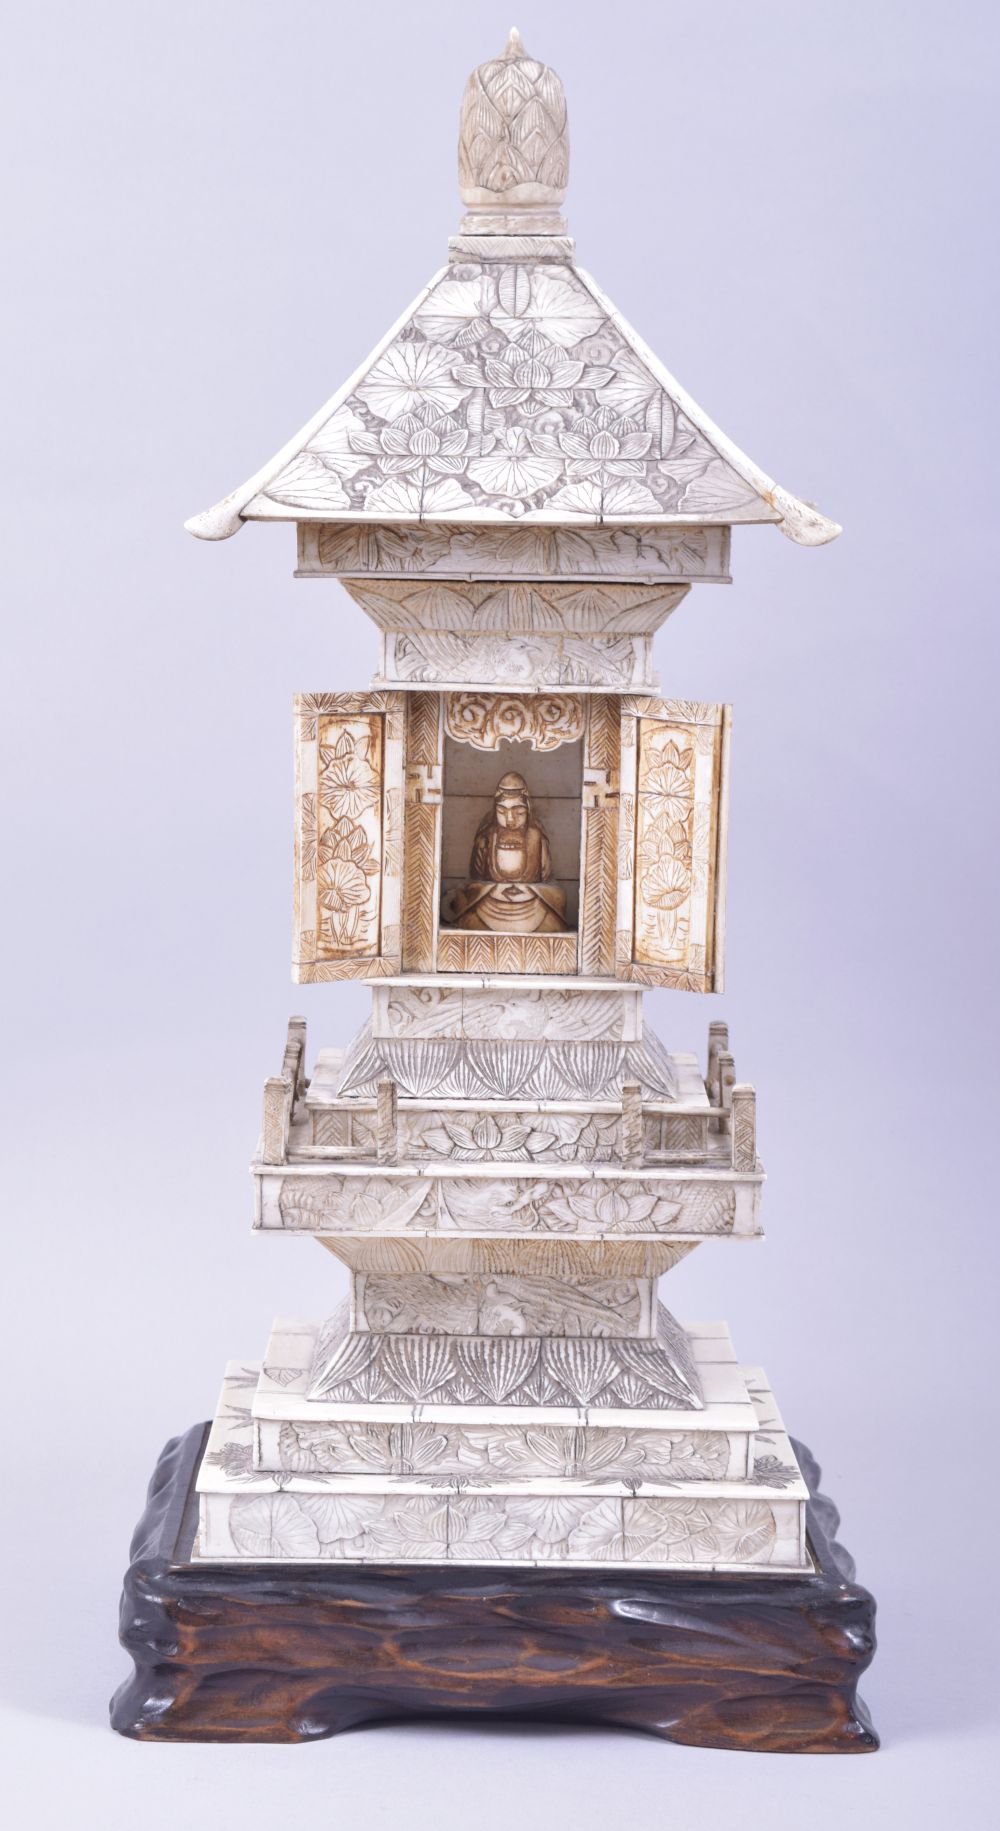 A CHINESE CARVED IVORY TEMPLE / PAGODA SHRINE, the central section with doors opening to reveal a